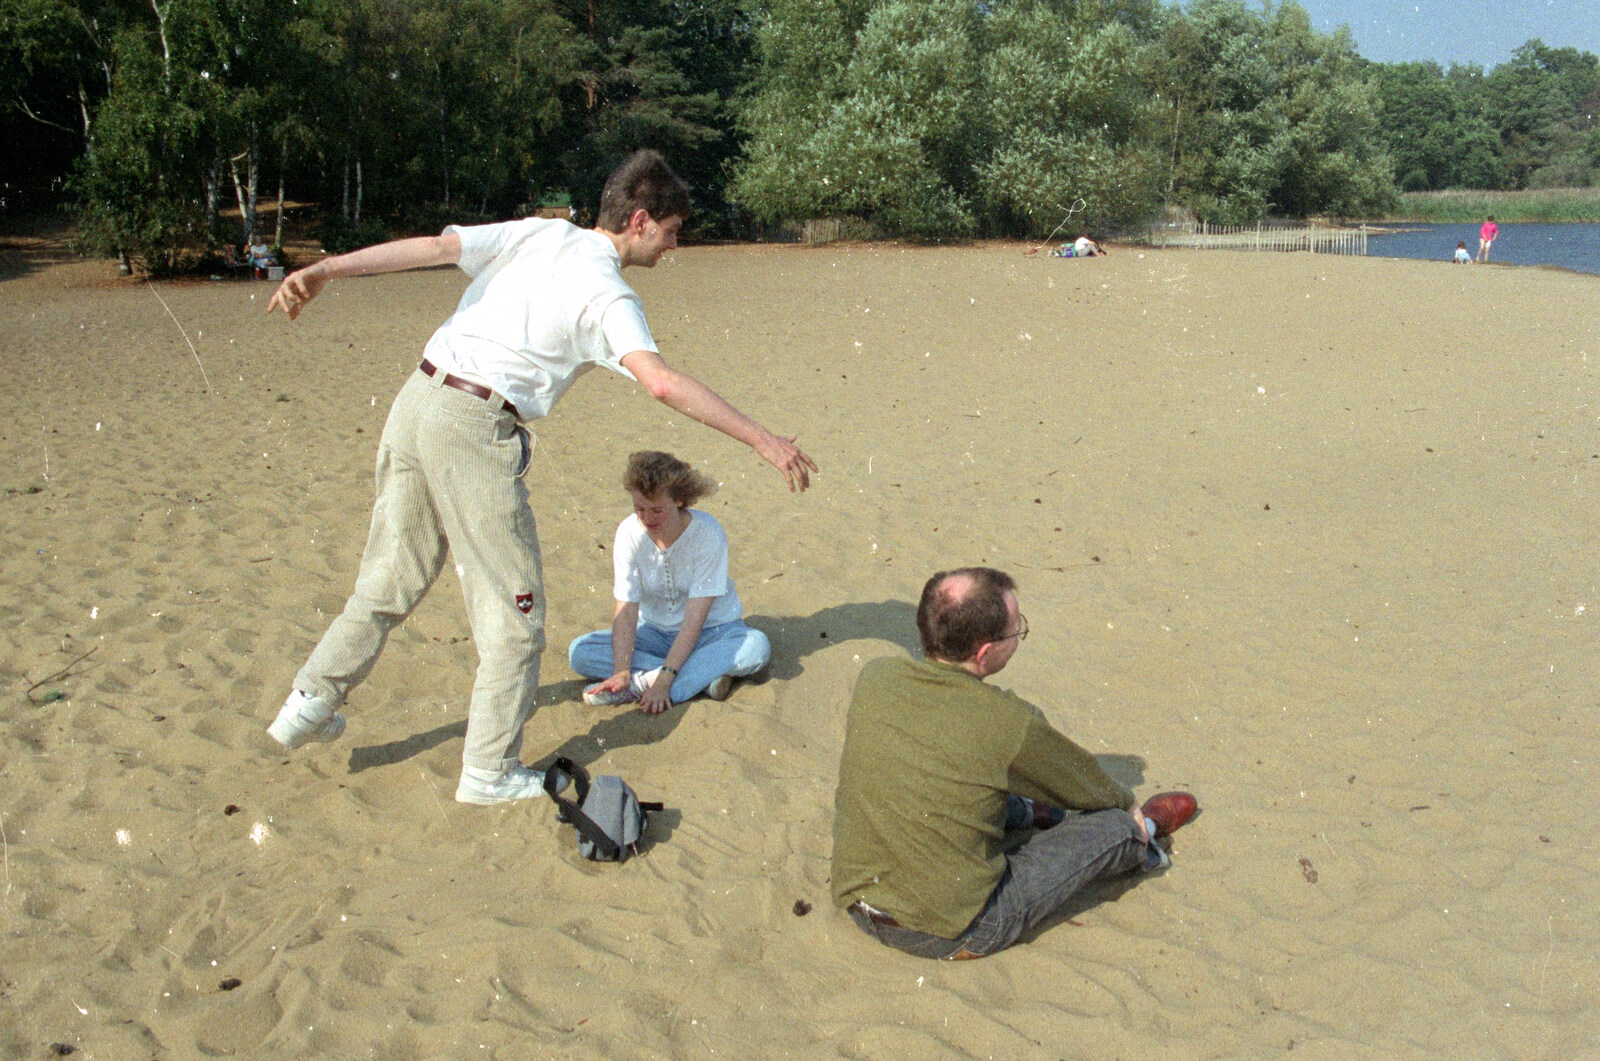 Sean messes about on a 'beach' from Printec at Thwaite Buck's Head, and a Trip to Farnborough, Suffolk and Hampshire - 19th August 1991